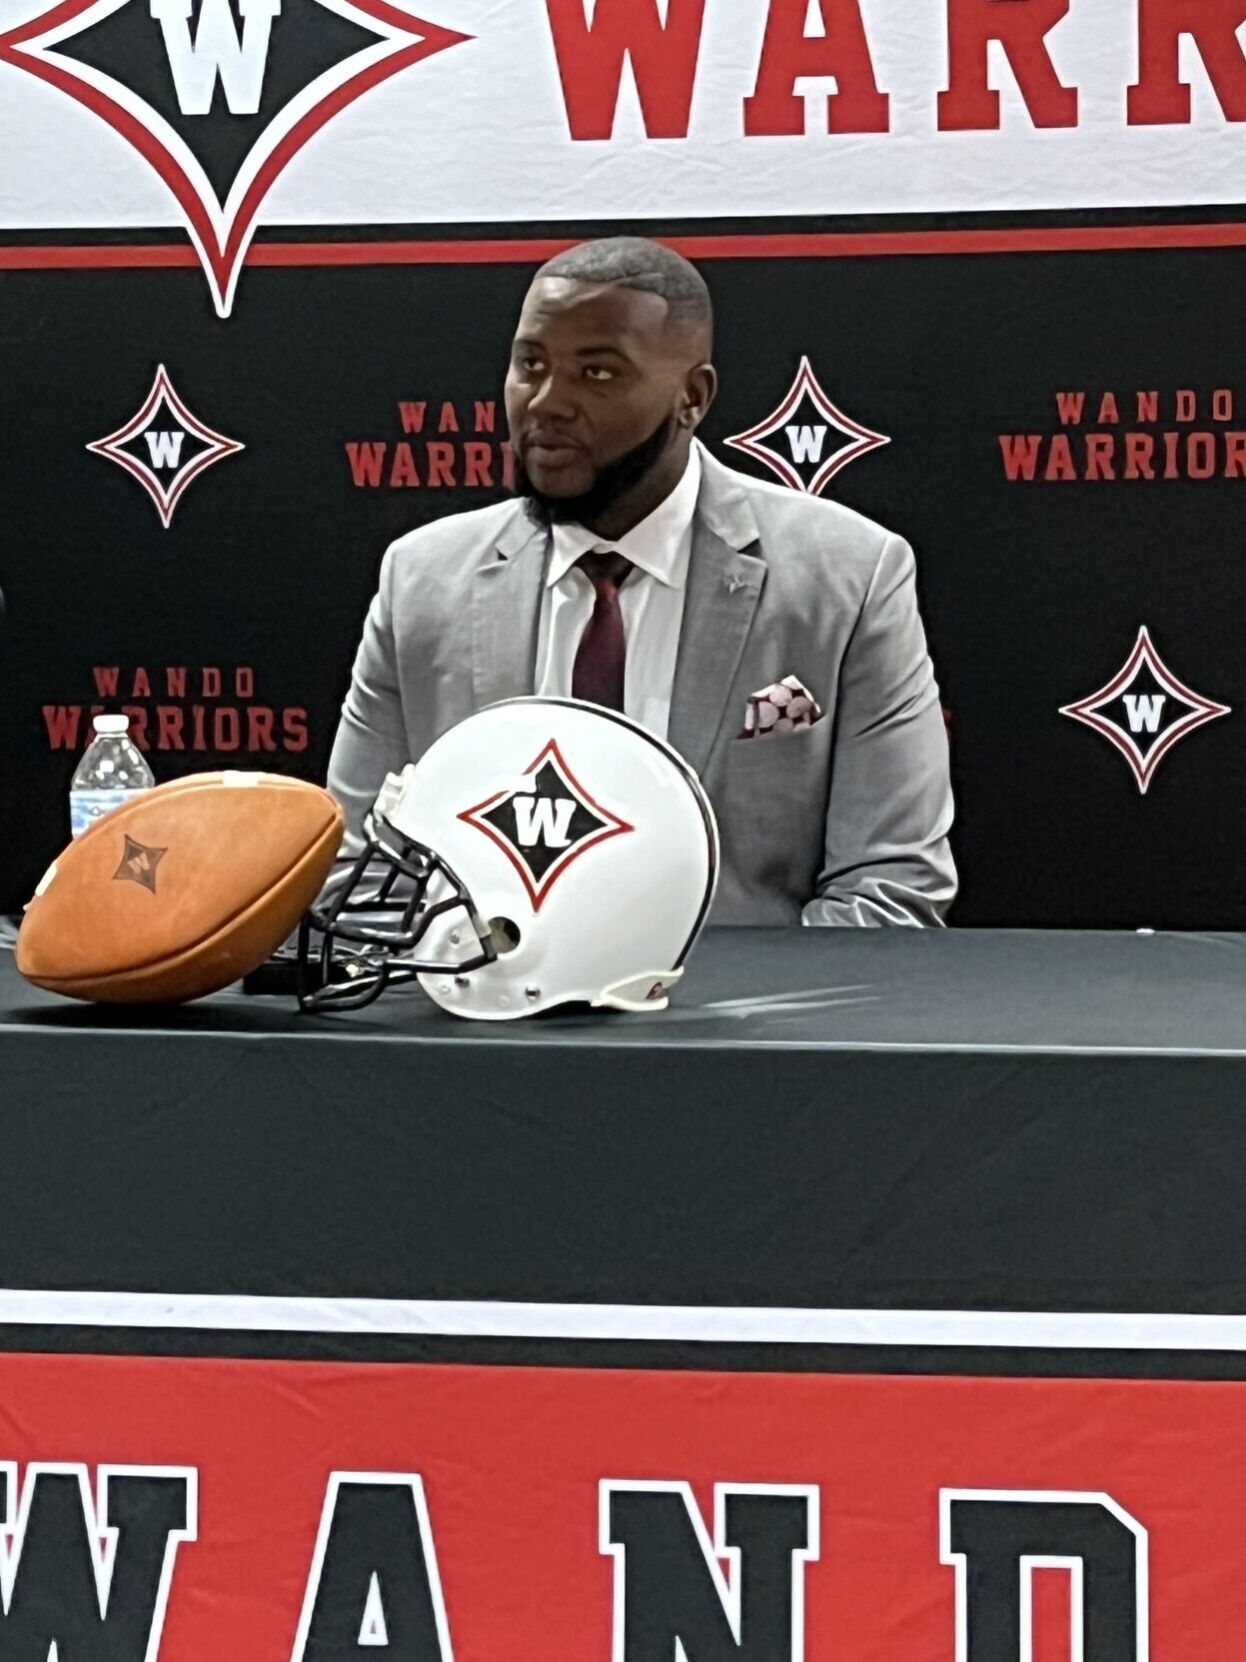 Isaiah Perrin Named Head Football Coach at Wando High School, Plans to Implement Spread Offense